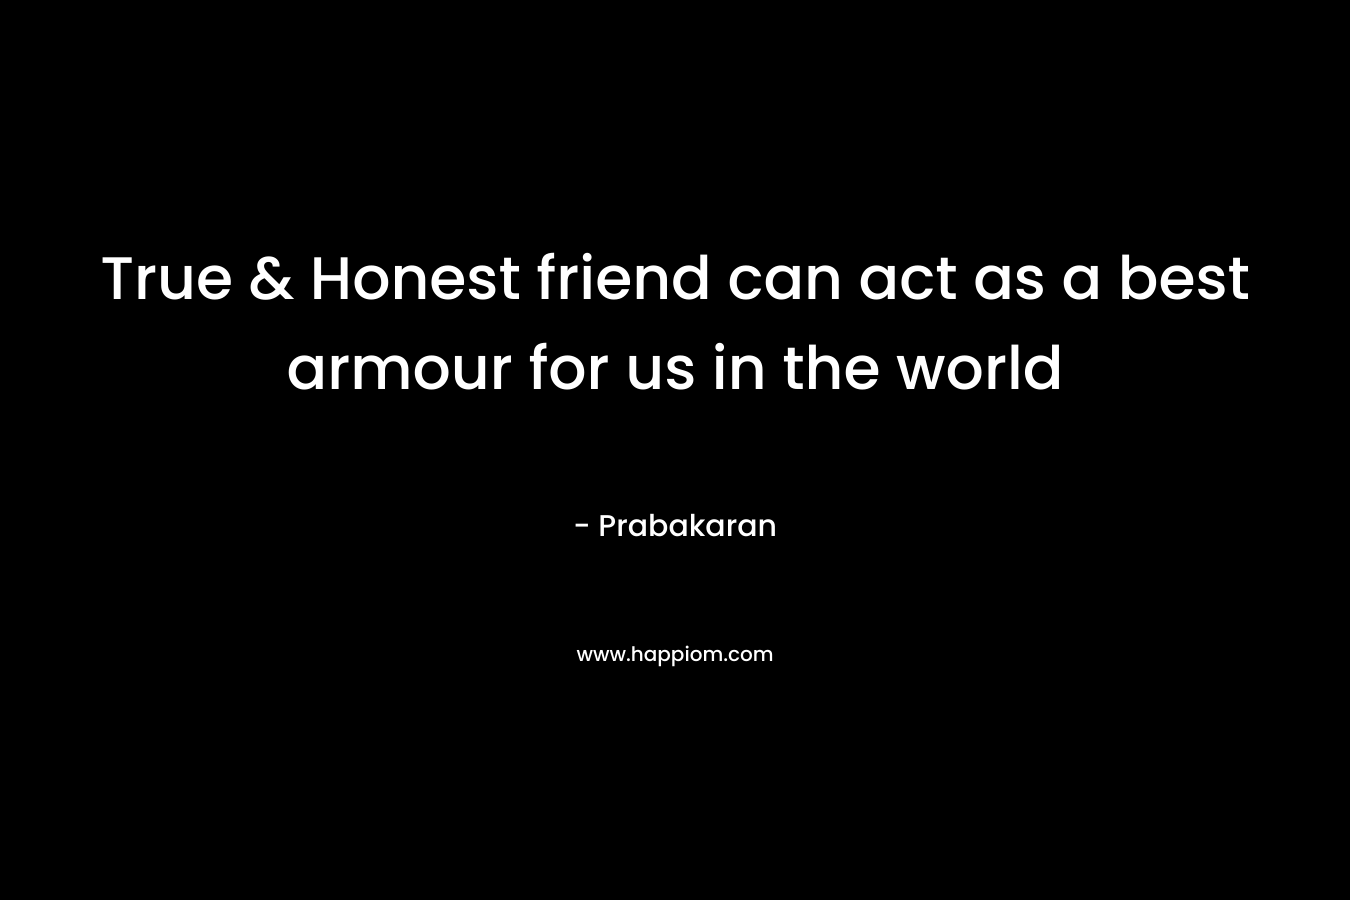 True & Honest friend can act as a best armour for us in the world